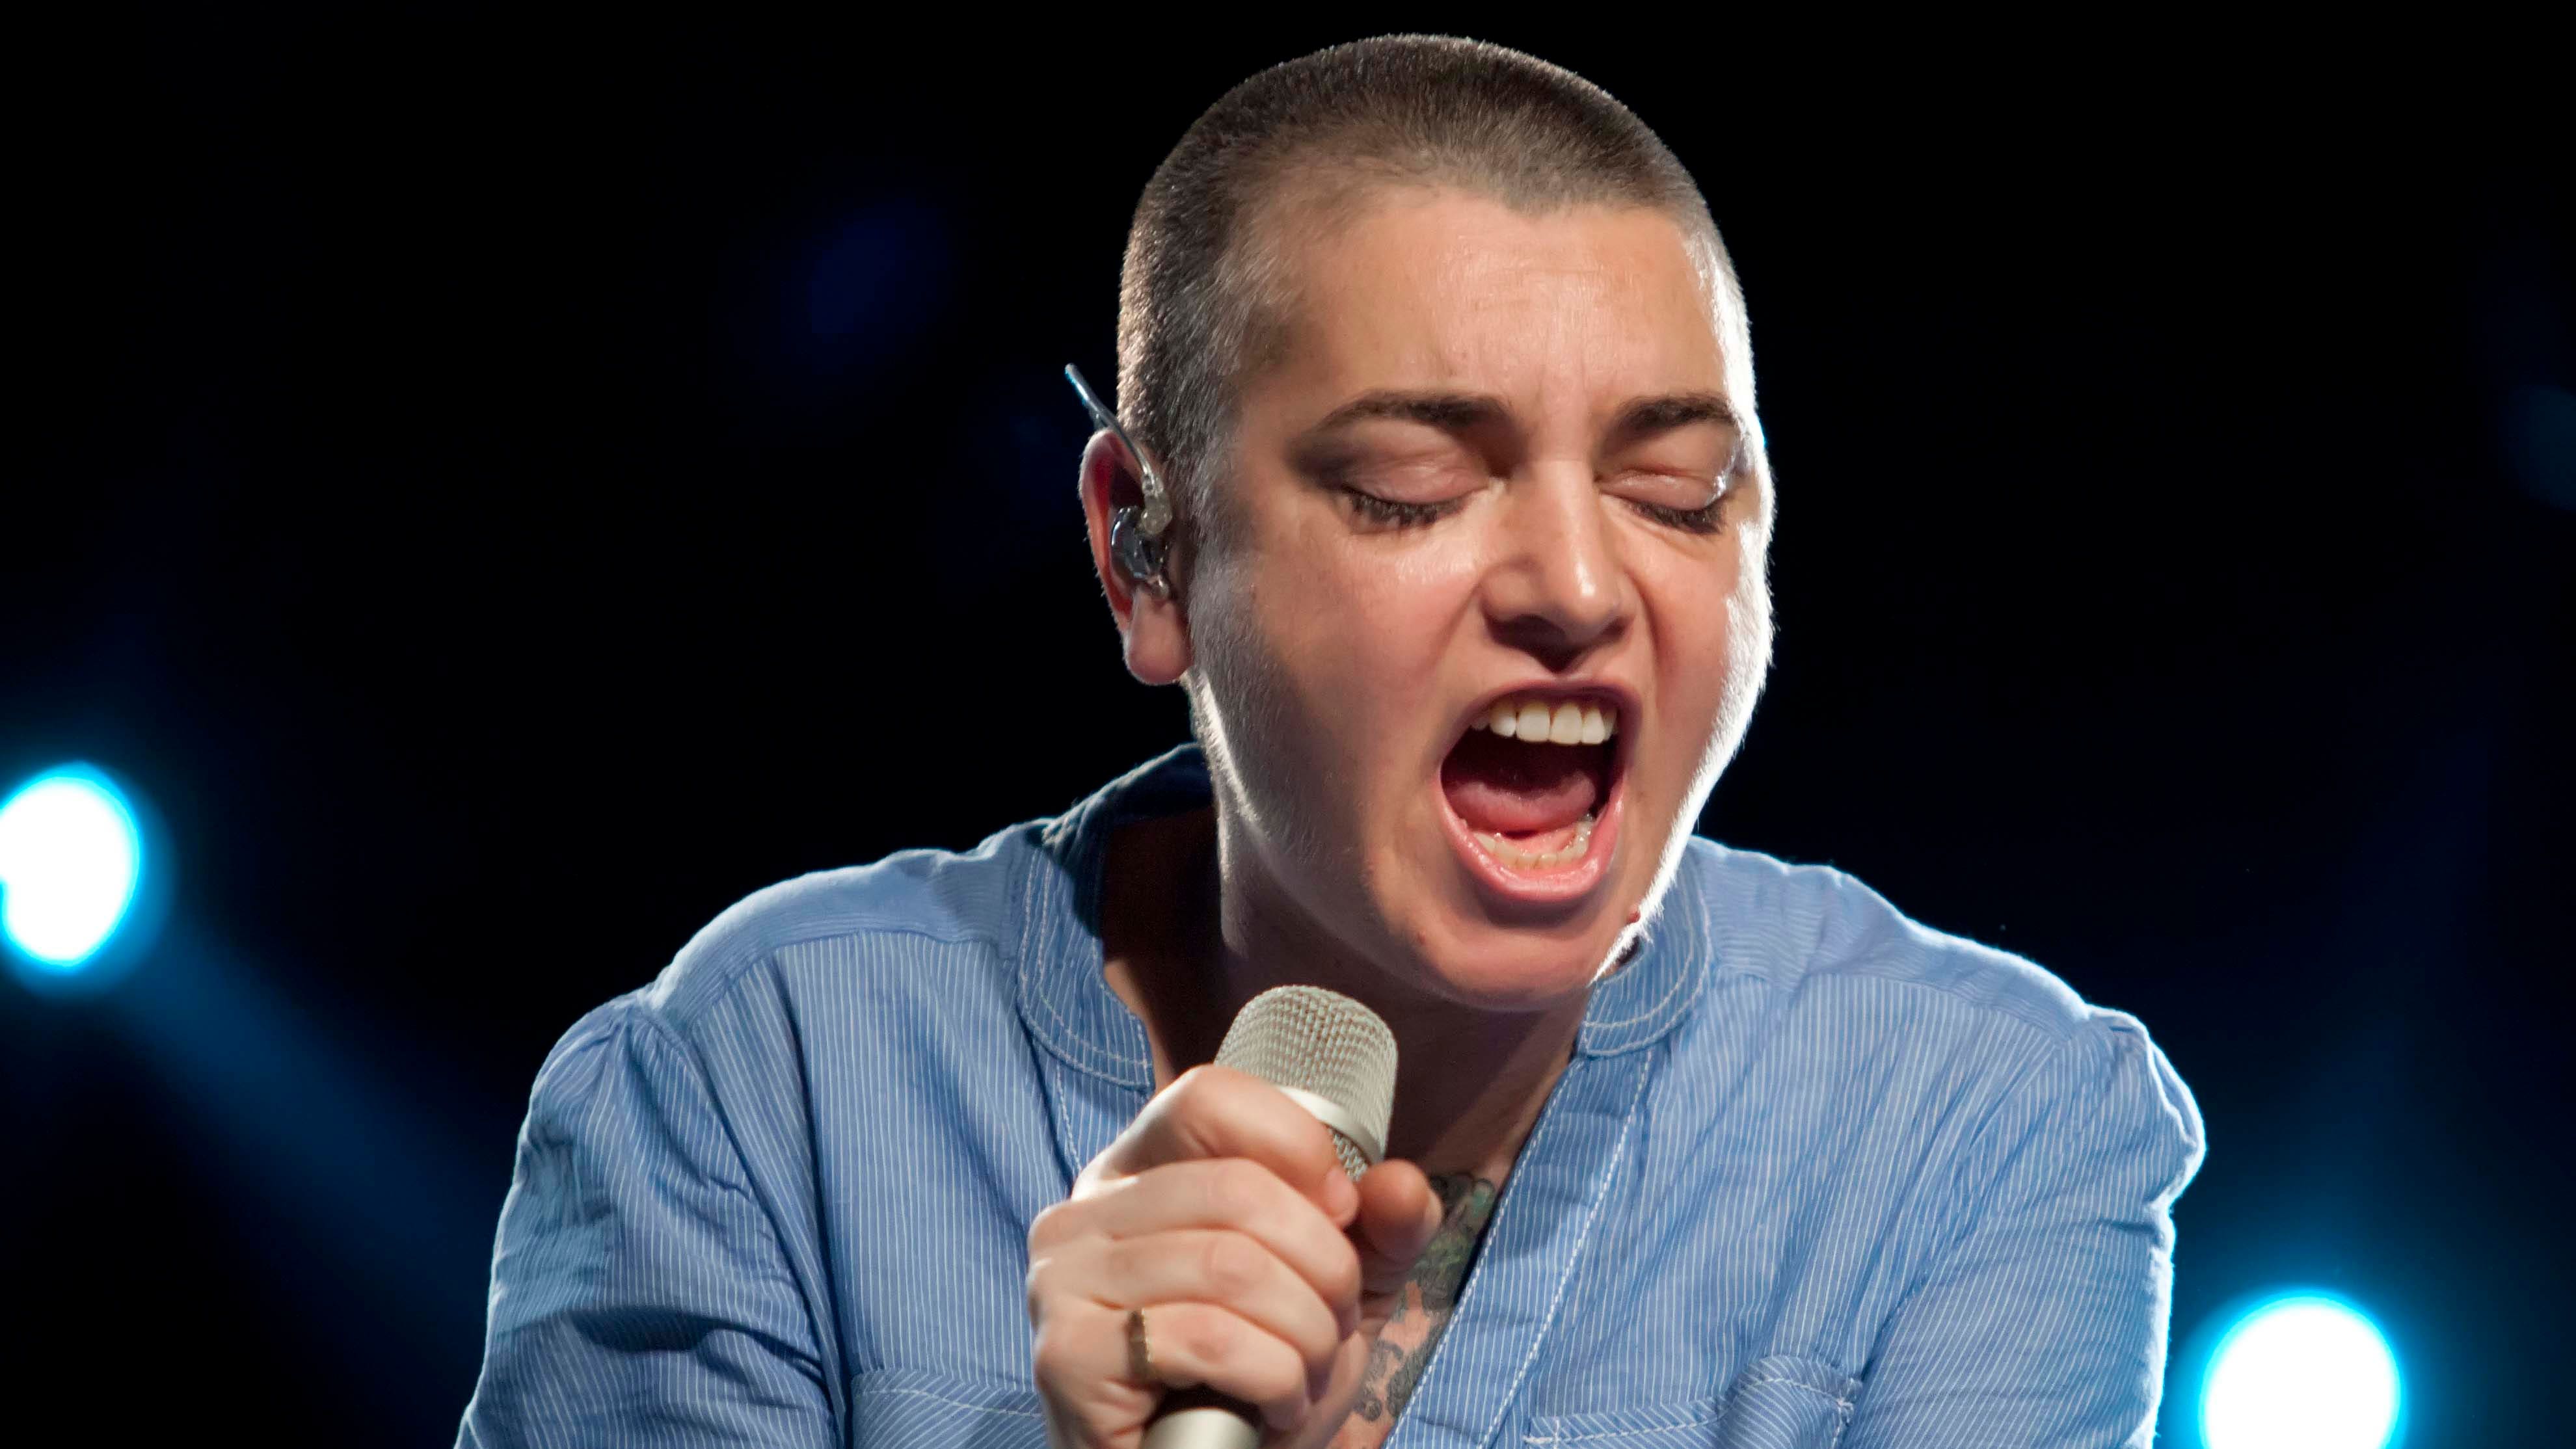 Sinéad OConnor wears a blue shirt and sings into the microphone in Berlin